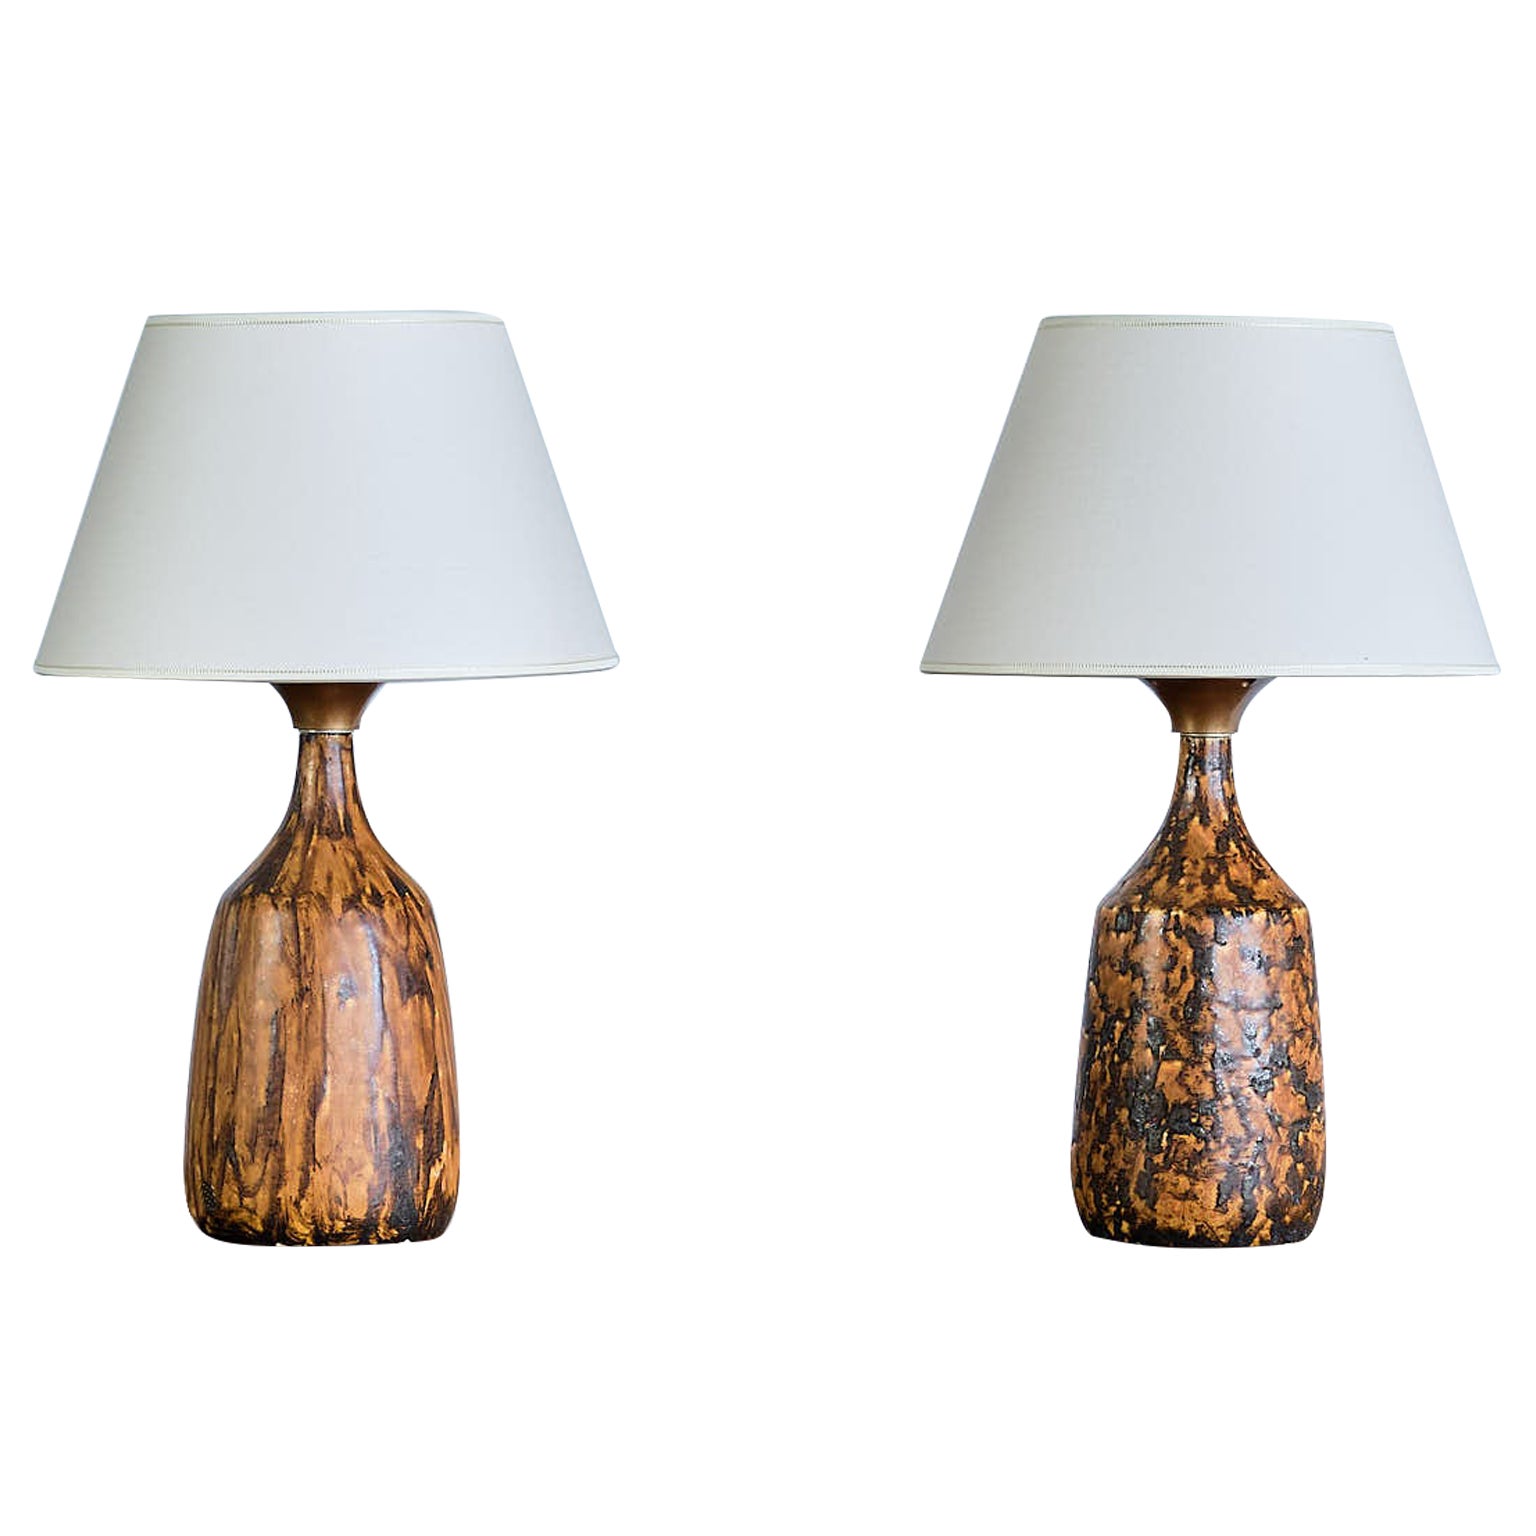 Pair of Gunnar Borg Glazed Stoneware Table Lamps, Höganäs, Sweden, 1960s For Sale